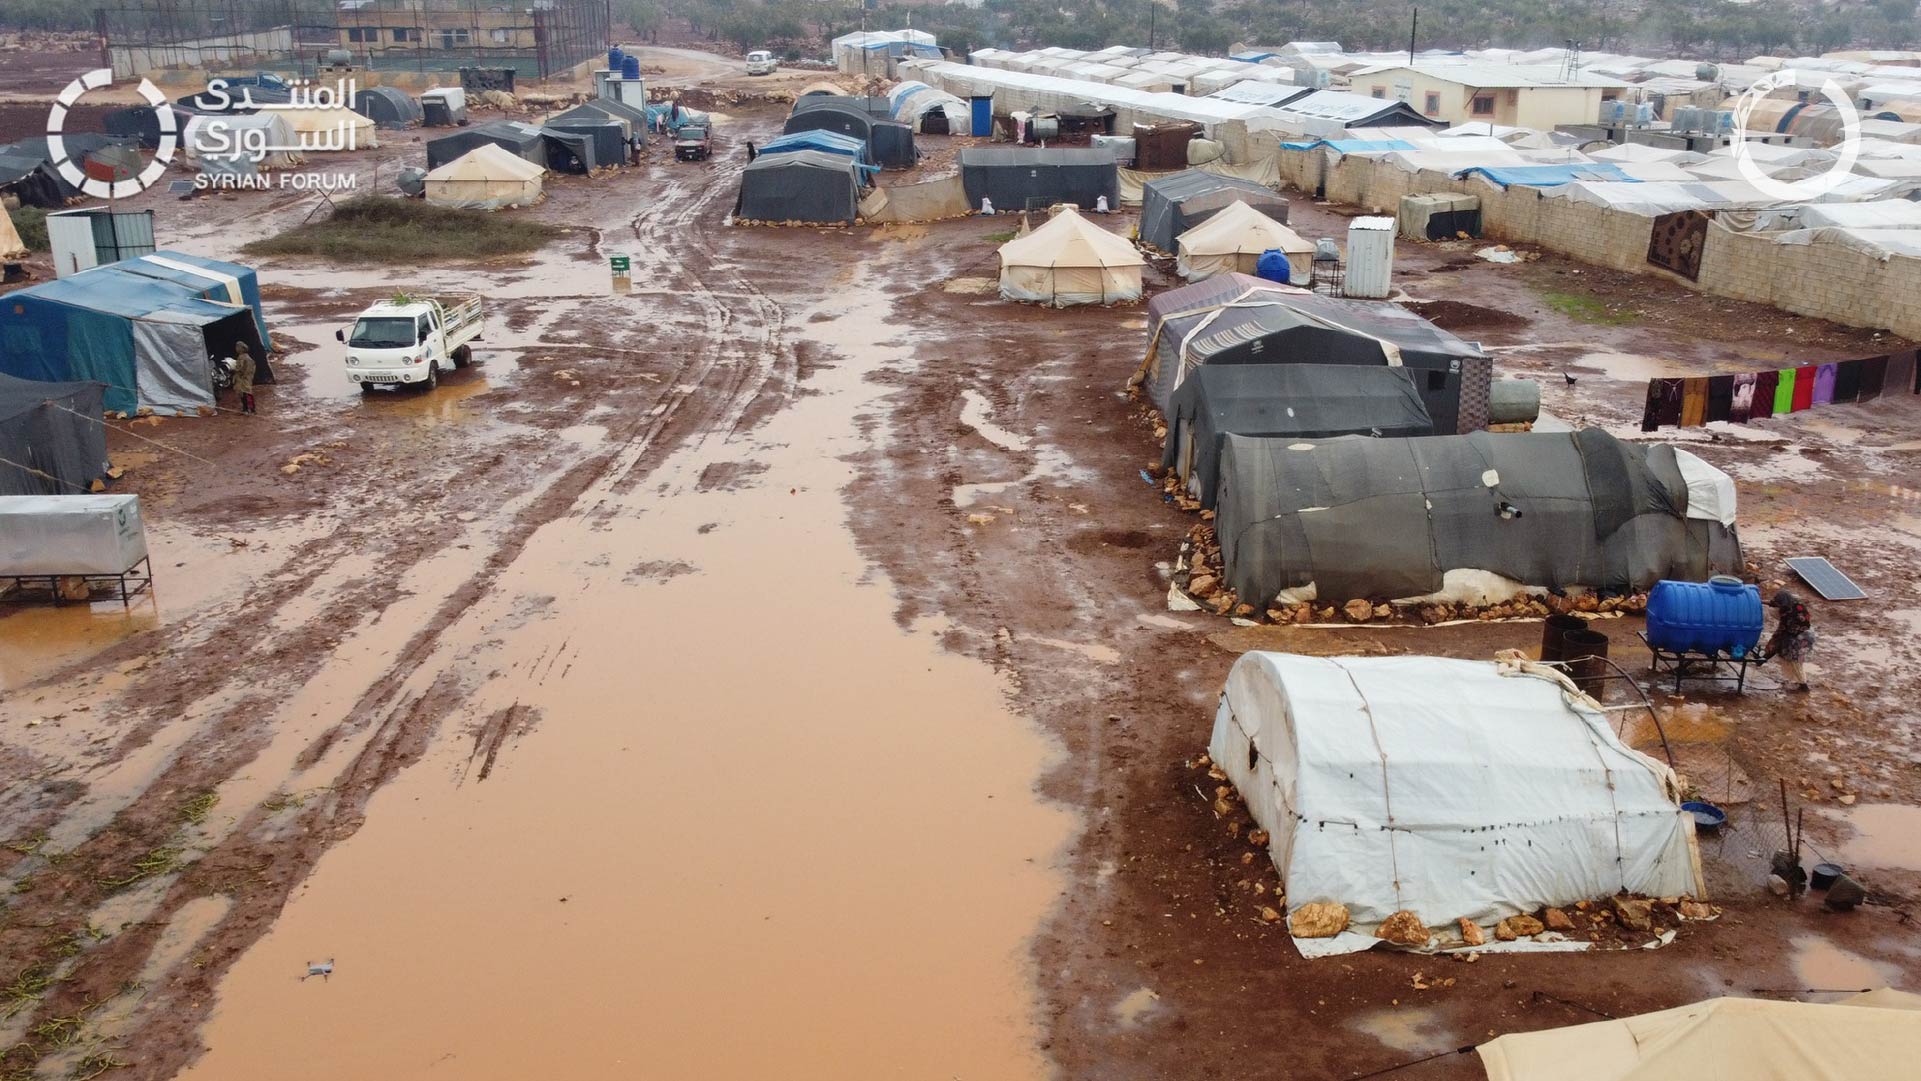 Harsh Winter Conditions Grip Camps in Northwest Syria